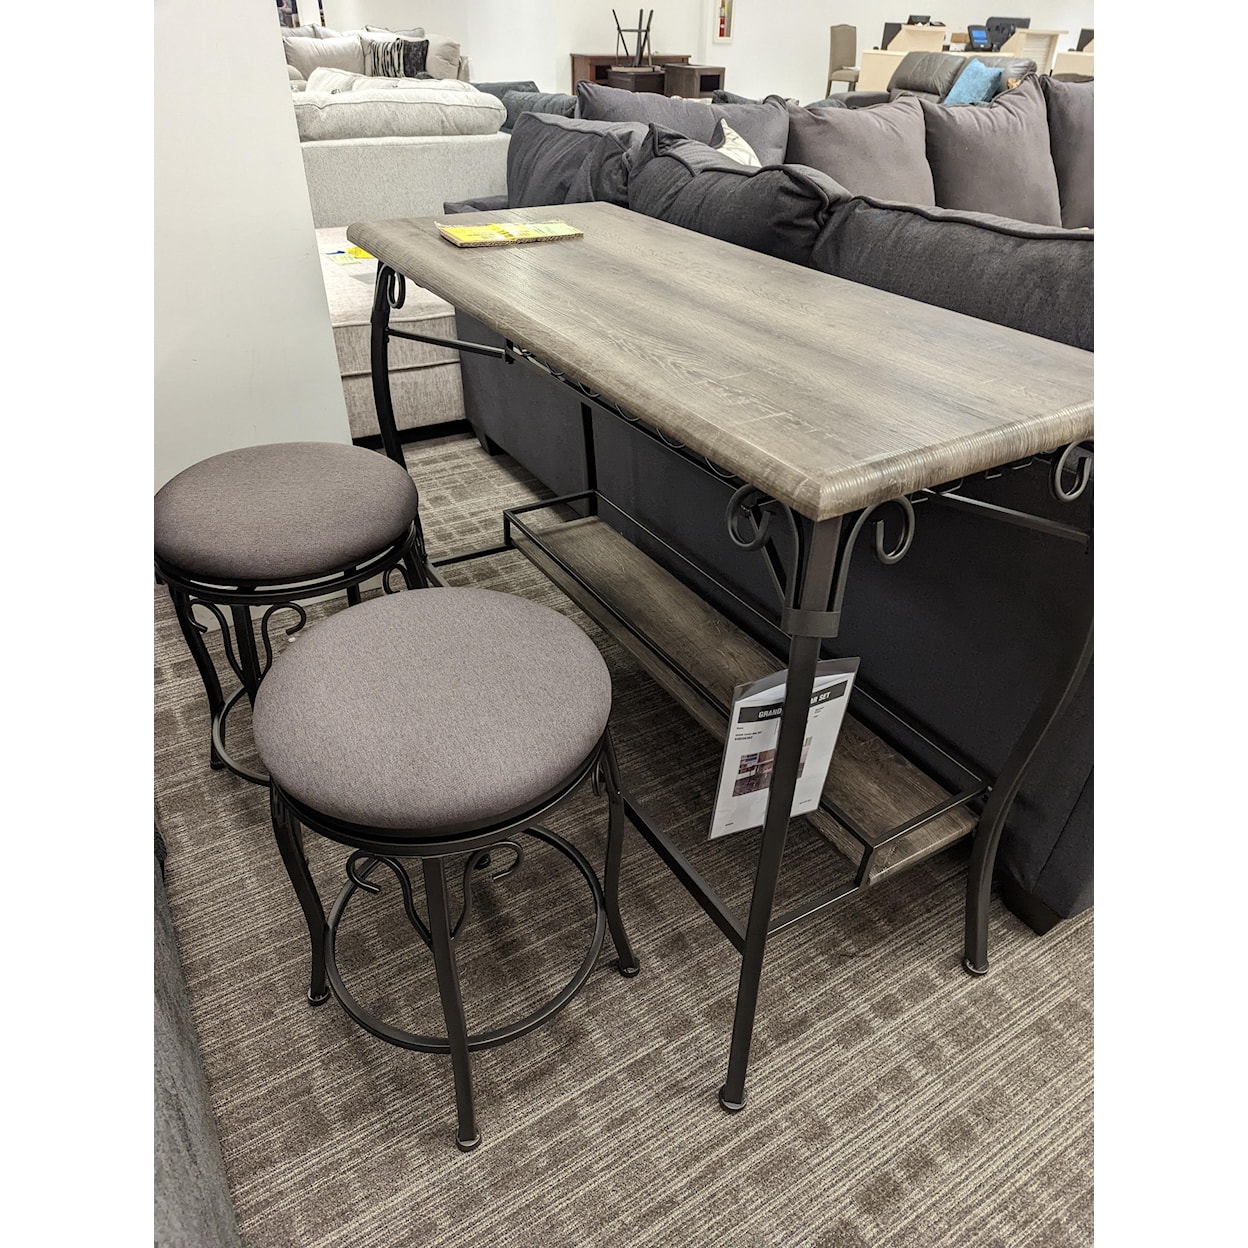 Morris Outlet Clearance and Closeouts Fairfield Commons Mall Last One! Grand Haven Bar Set!